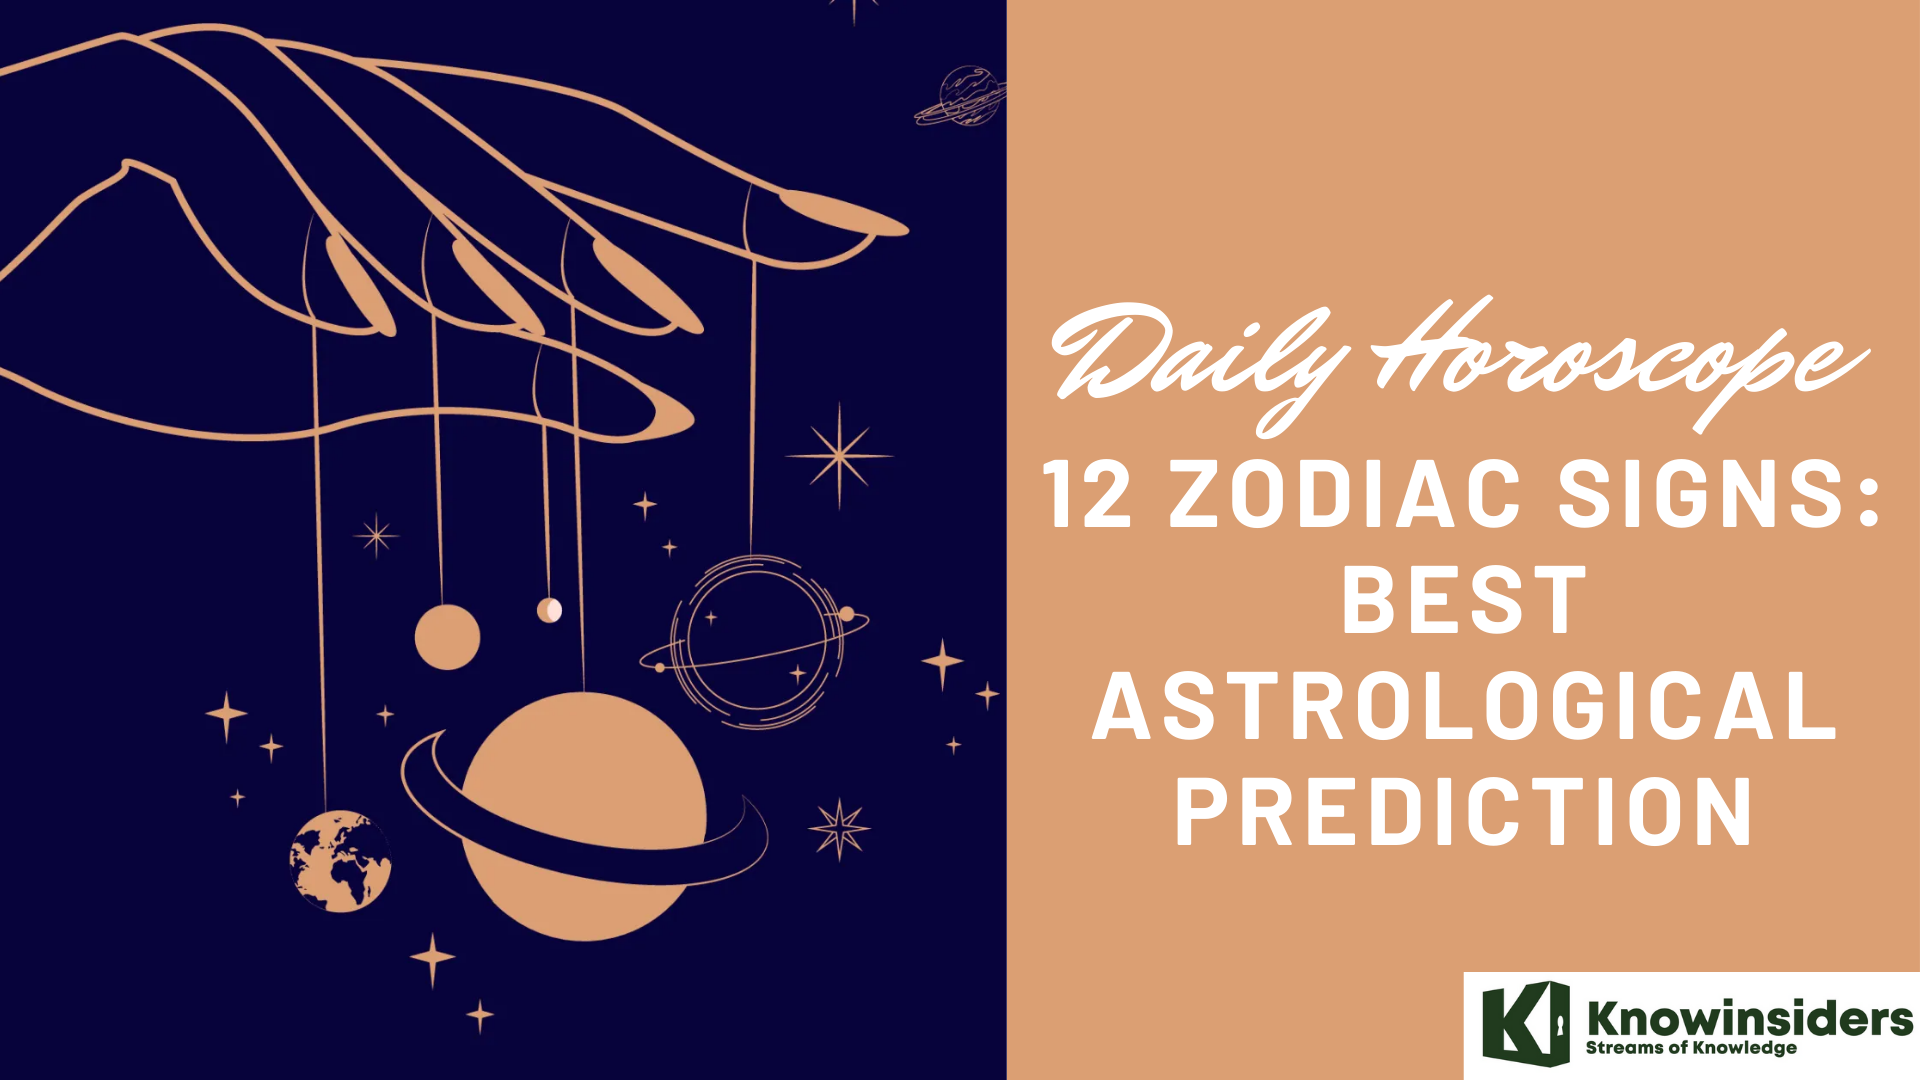 Daily Horoscope (June 3, 2022): Best Astrological Prediction for 12 Zodiac Signs